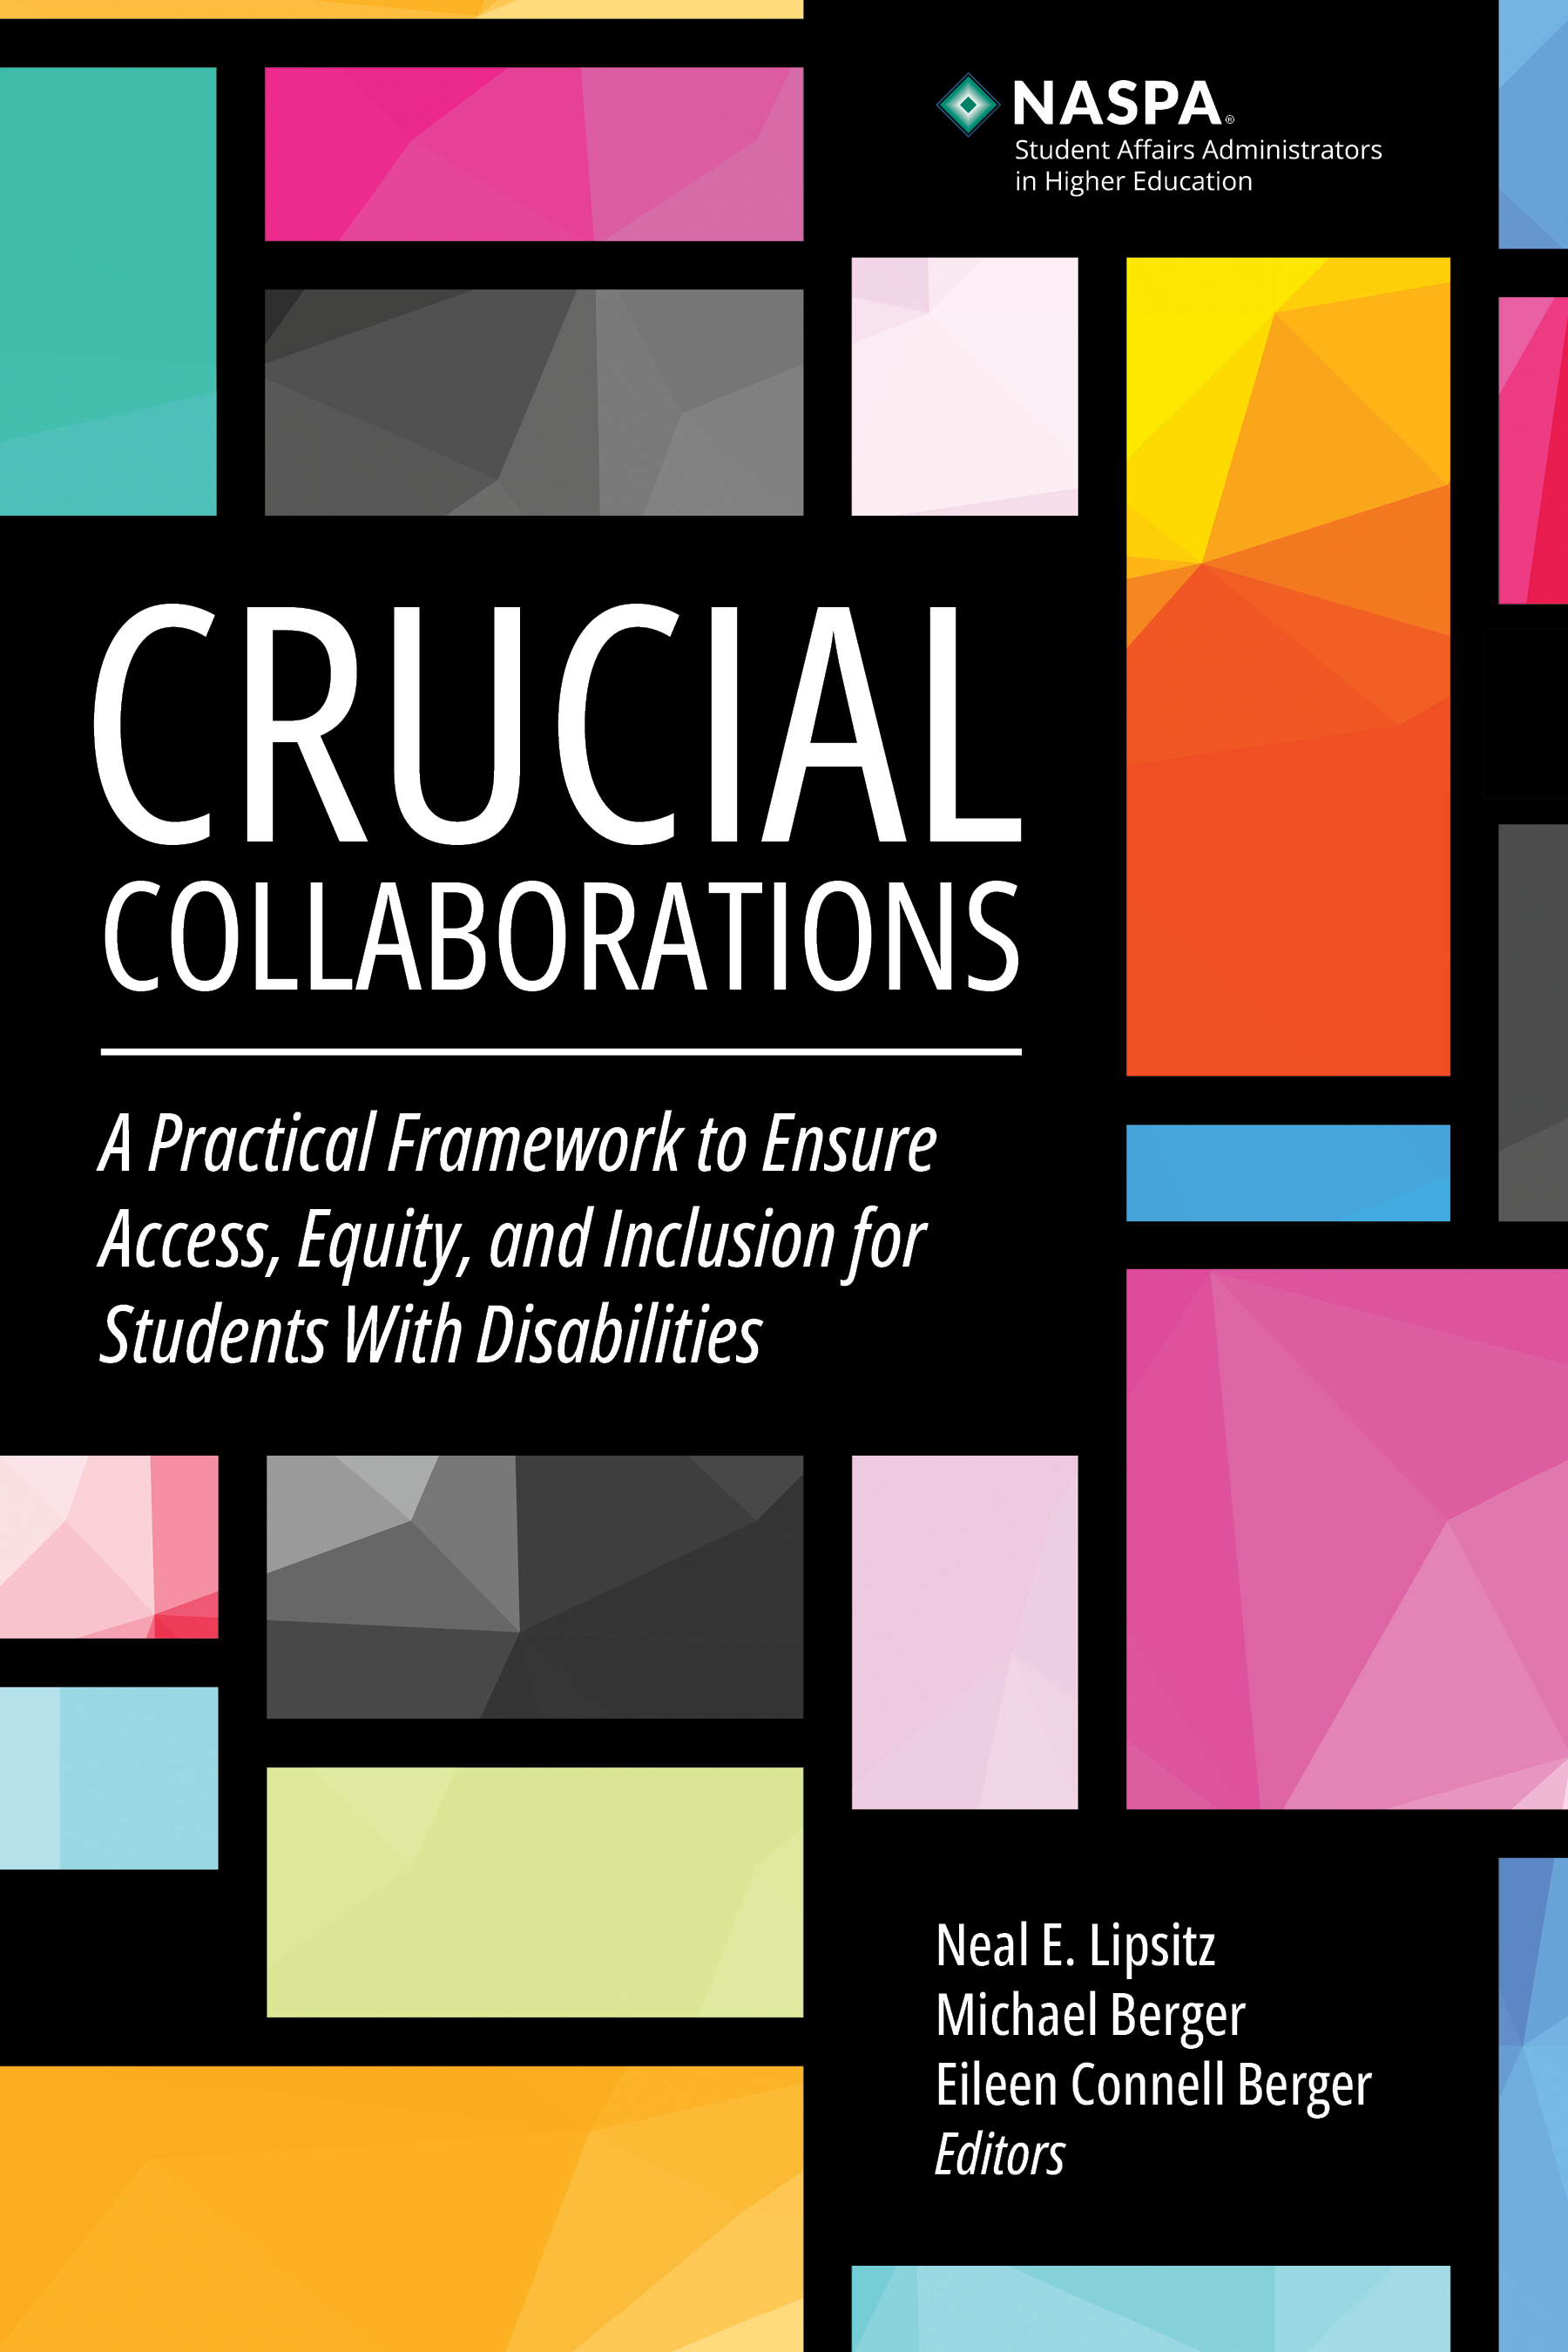 Crucial Collaborations Cover